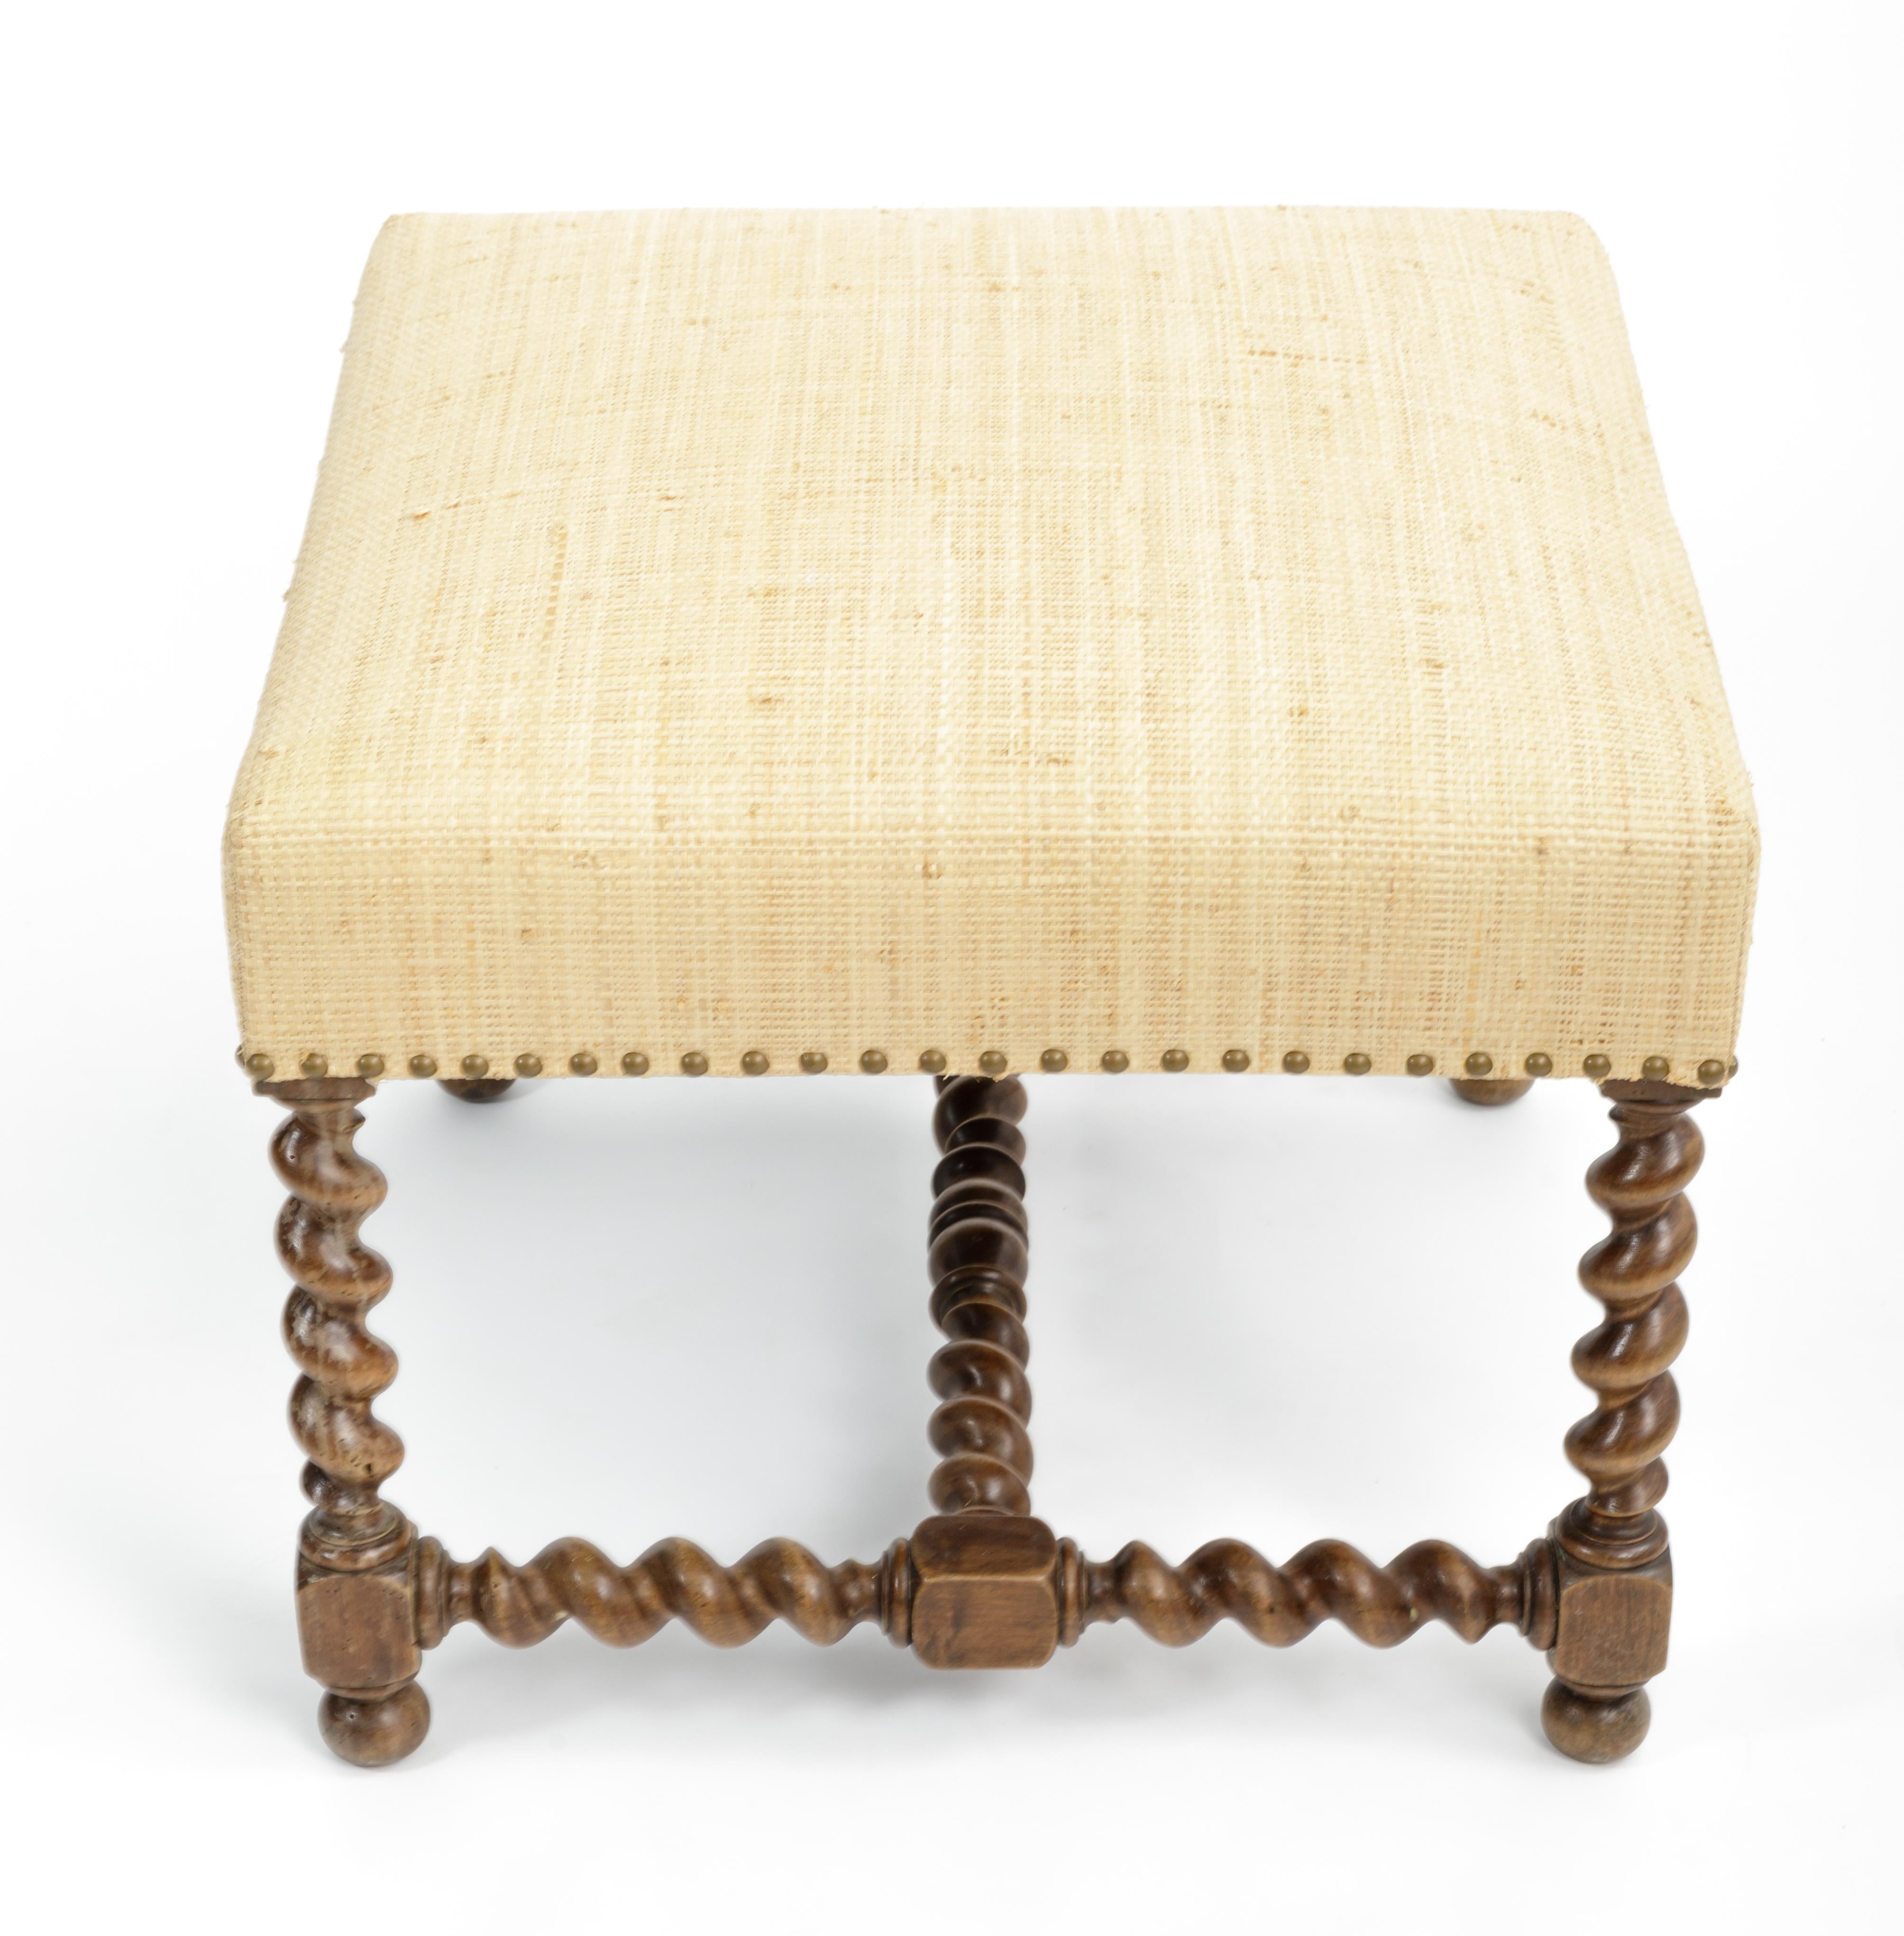 Antique Barley Twist Stool with Cream Linen Upholstery, Europe, 19th Century In Good Condition For Sale In New York City, NY